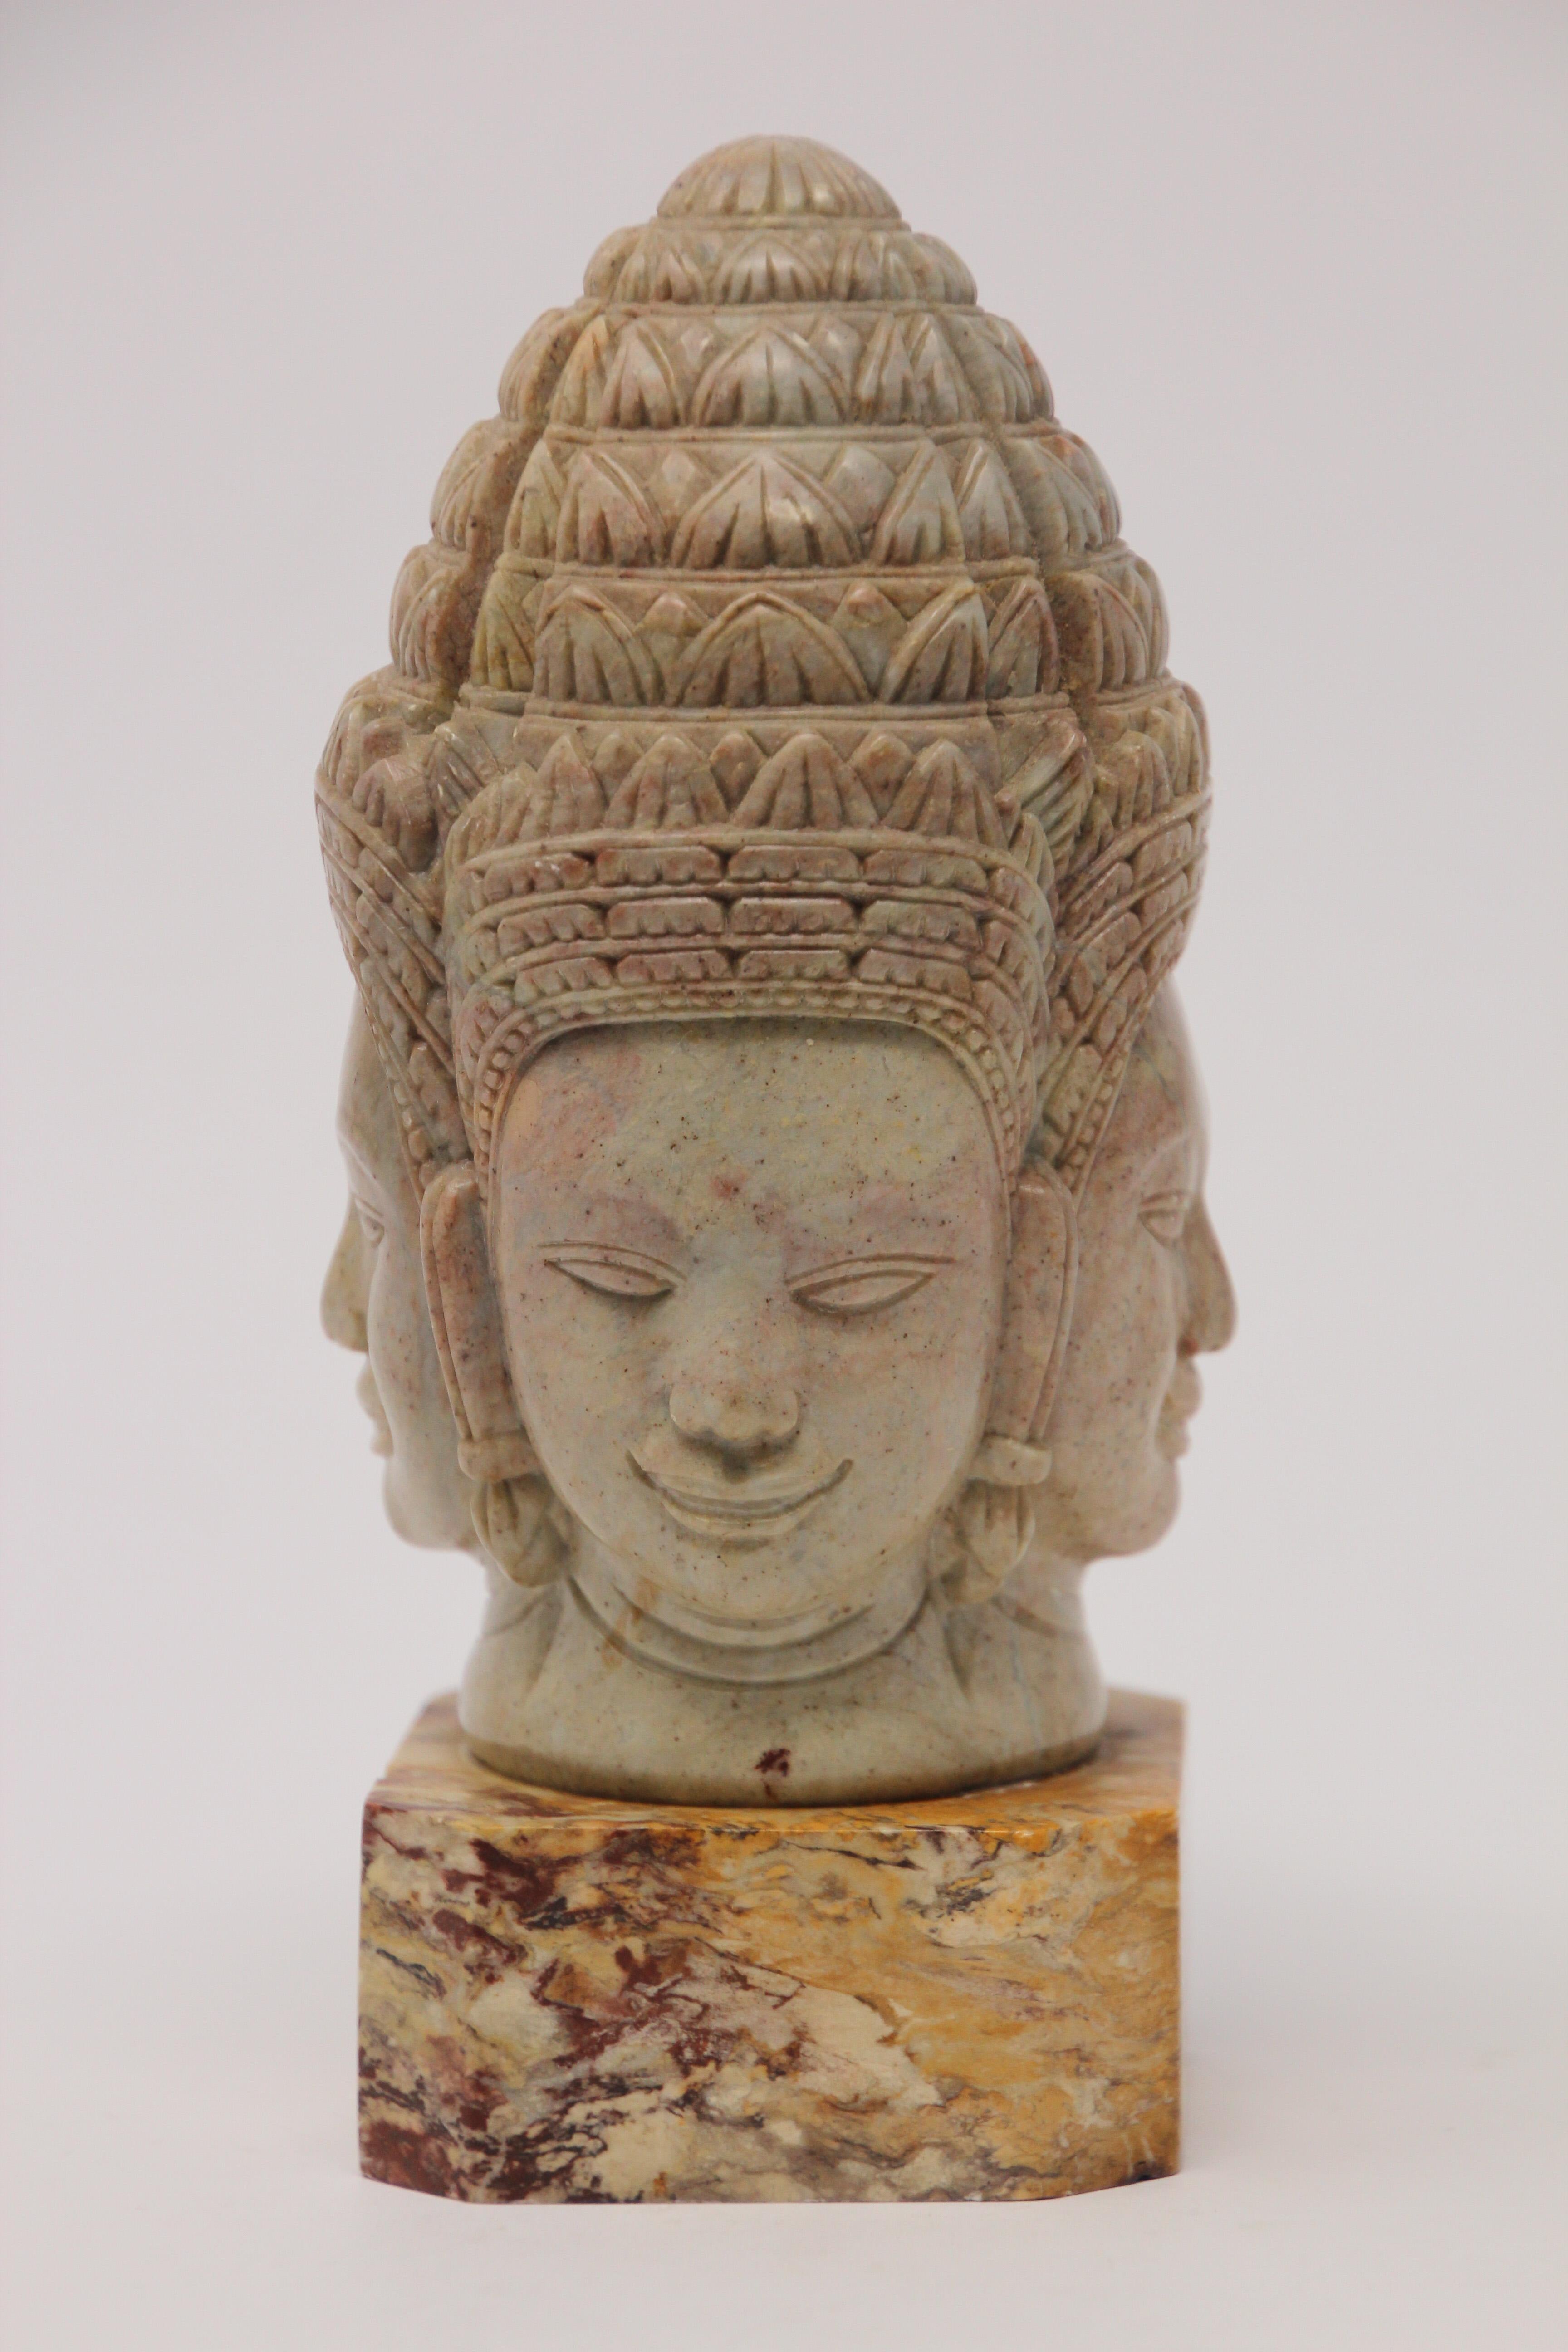 This bust is a beautiful representation of lord Brahma.
Brahma is a part of the holy trinity of Hinduism along with Vishnu the Preserver and Shiva the destroyer.
He is depicted in Hindu iconography with four faces
Each one of Brahma's smiling faces